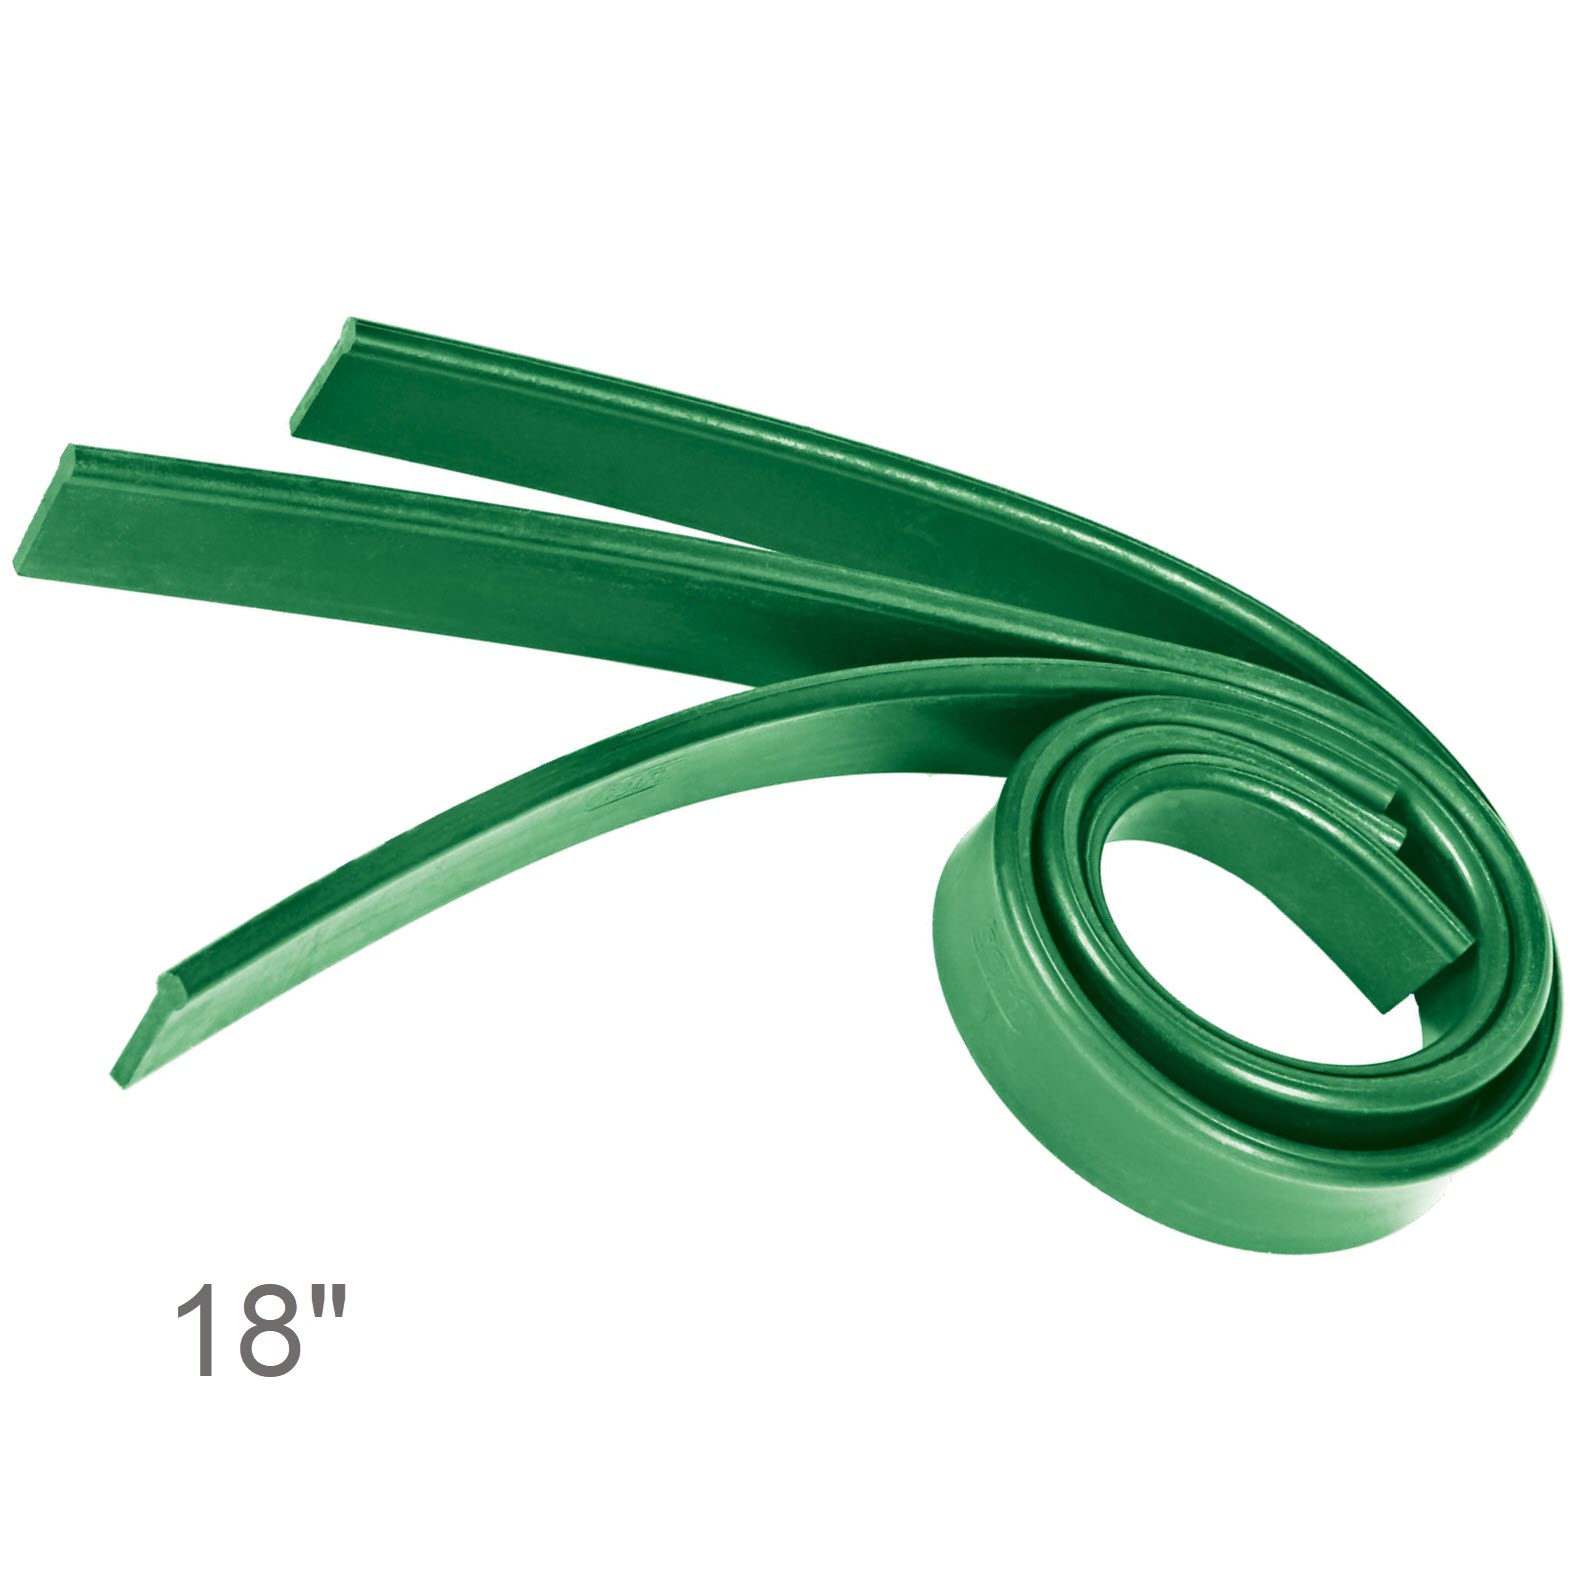 https://www.jracenstein.com/mmjrcnew/images/unger-power-rubber-green-squeegee-replacement-rubber-18in-03-21824.jpg